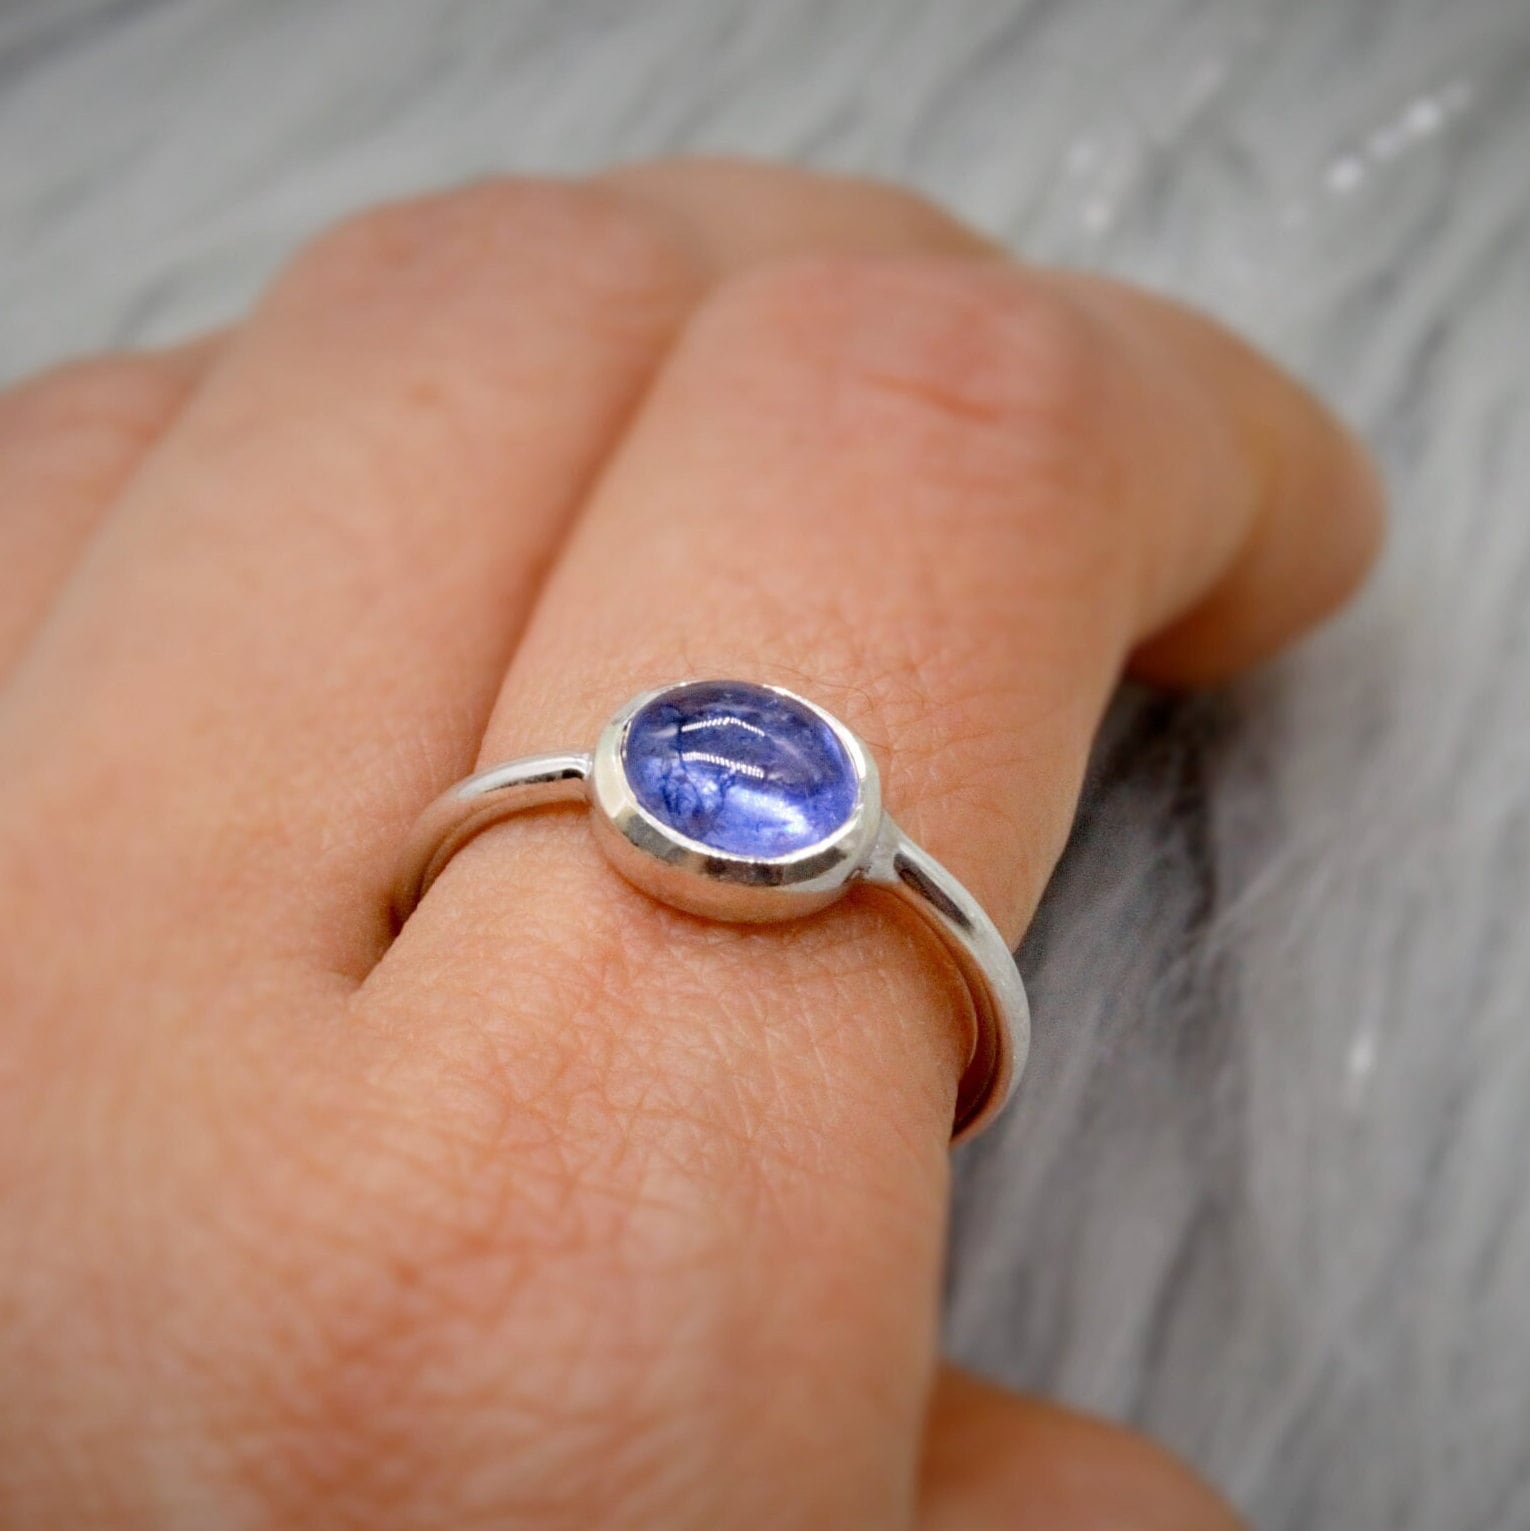 Tanzanite 925 Sterling Silver Ring, Rings for Women, Dainty Blue Gemstone Ring, December Birthstone, Blue Gem Ring, Gifts For Her